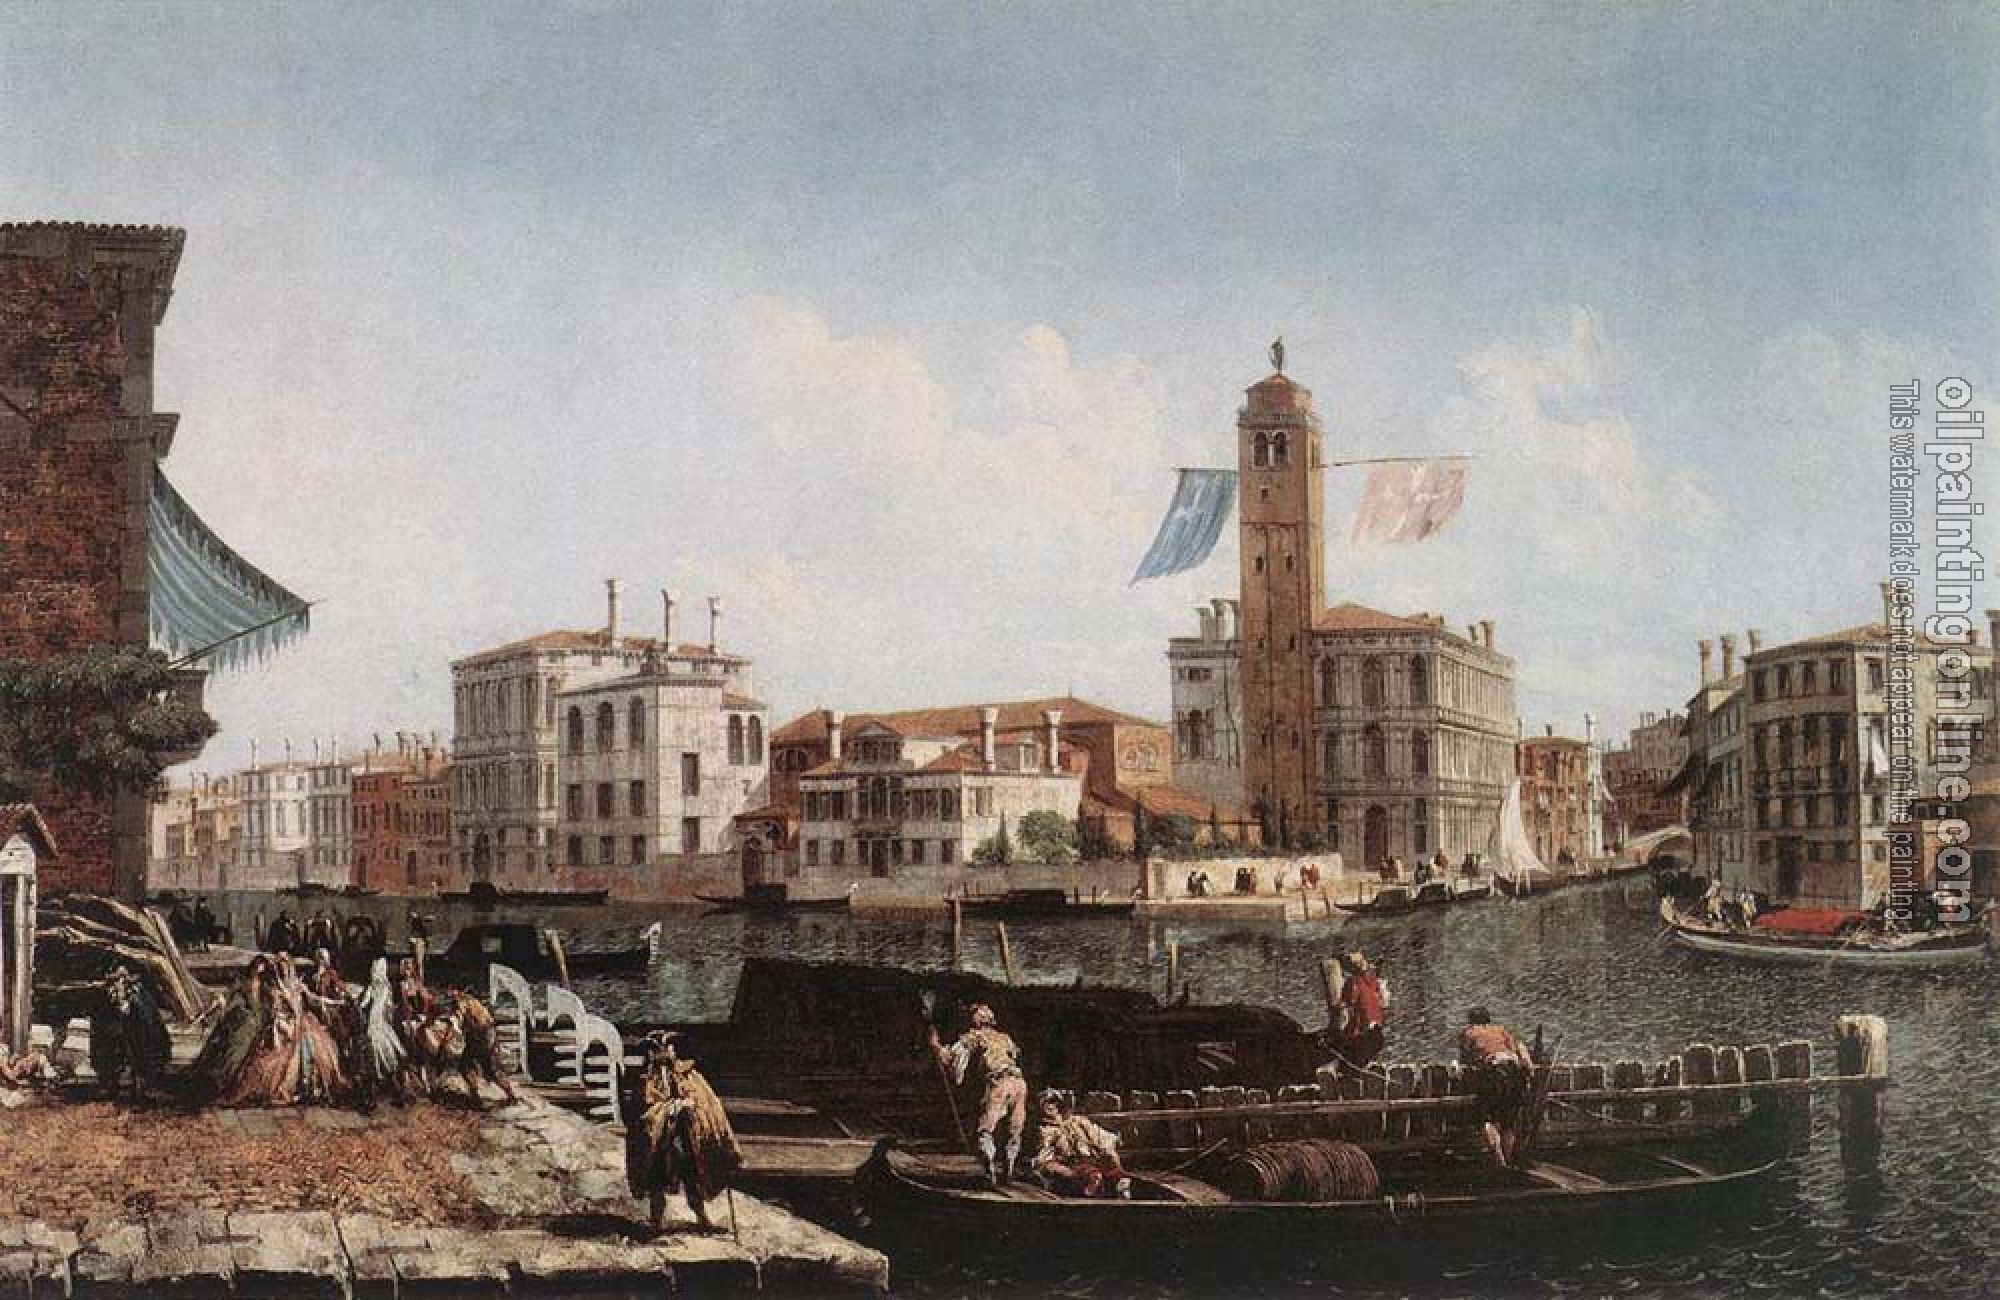 Michele Marieschi - The Grand Canal with the Fishmarket